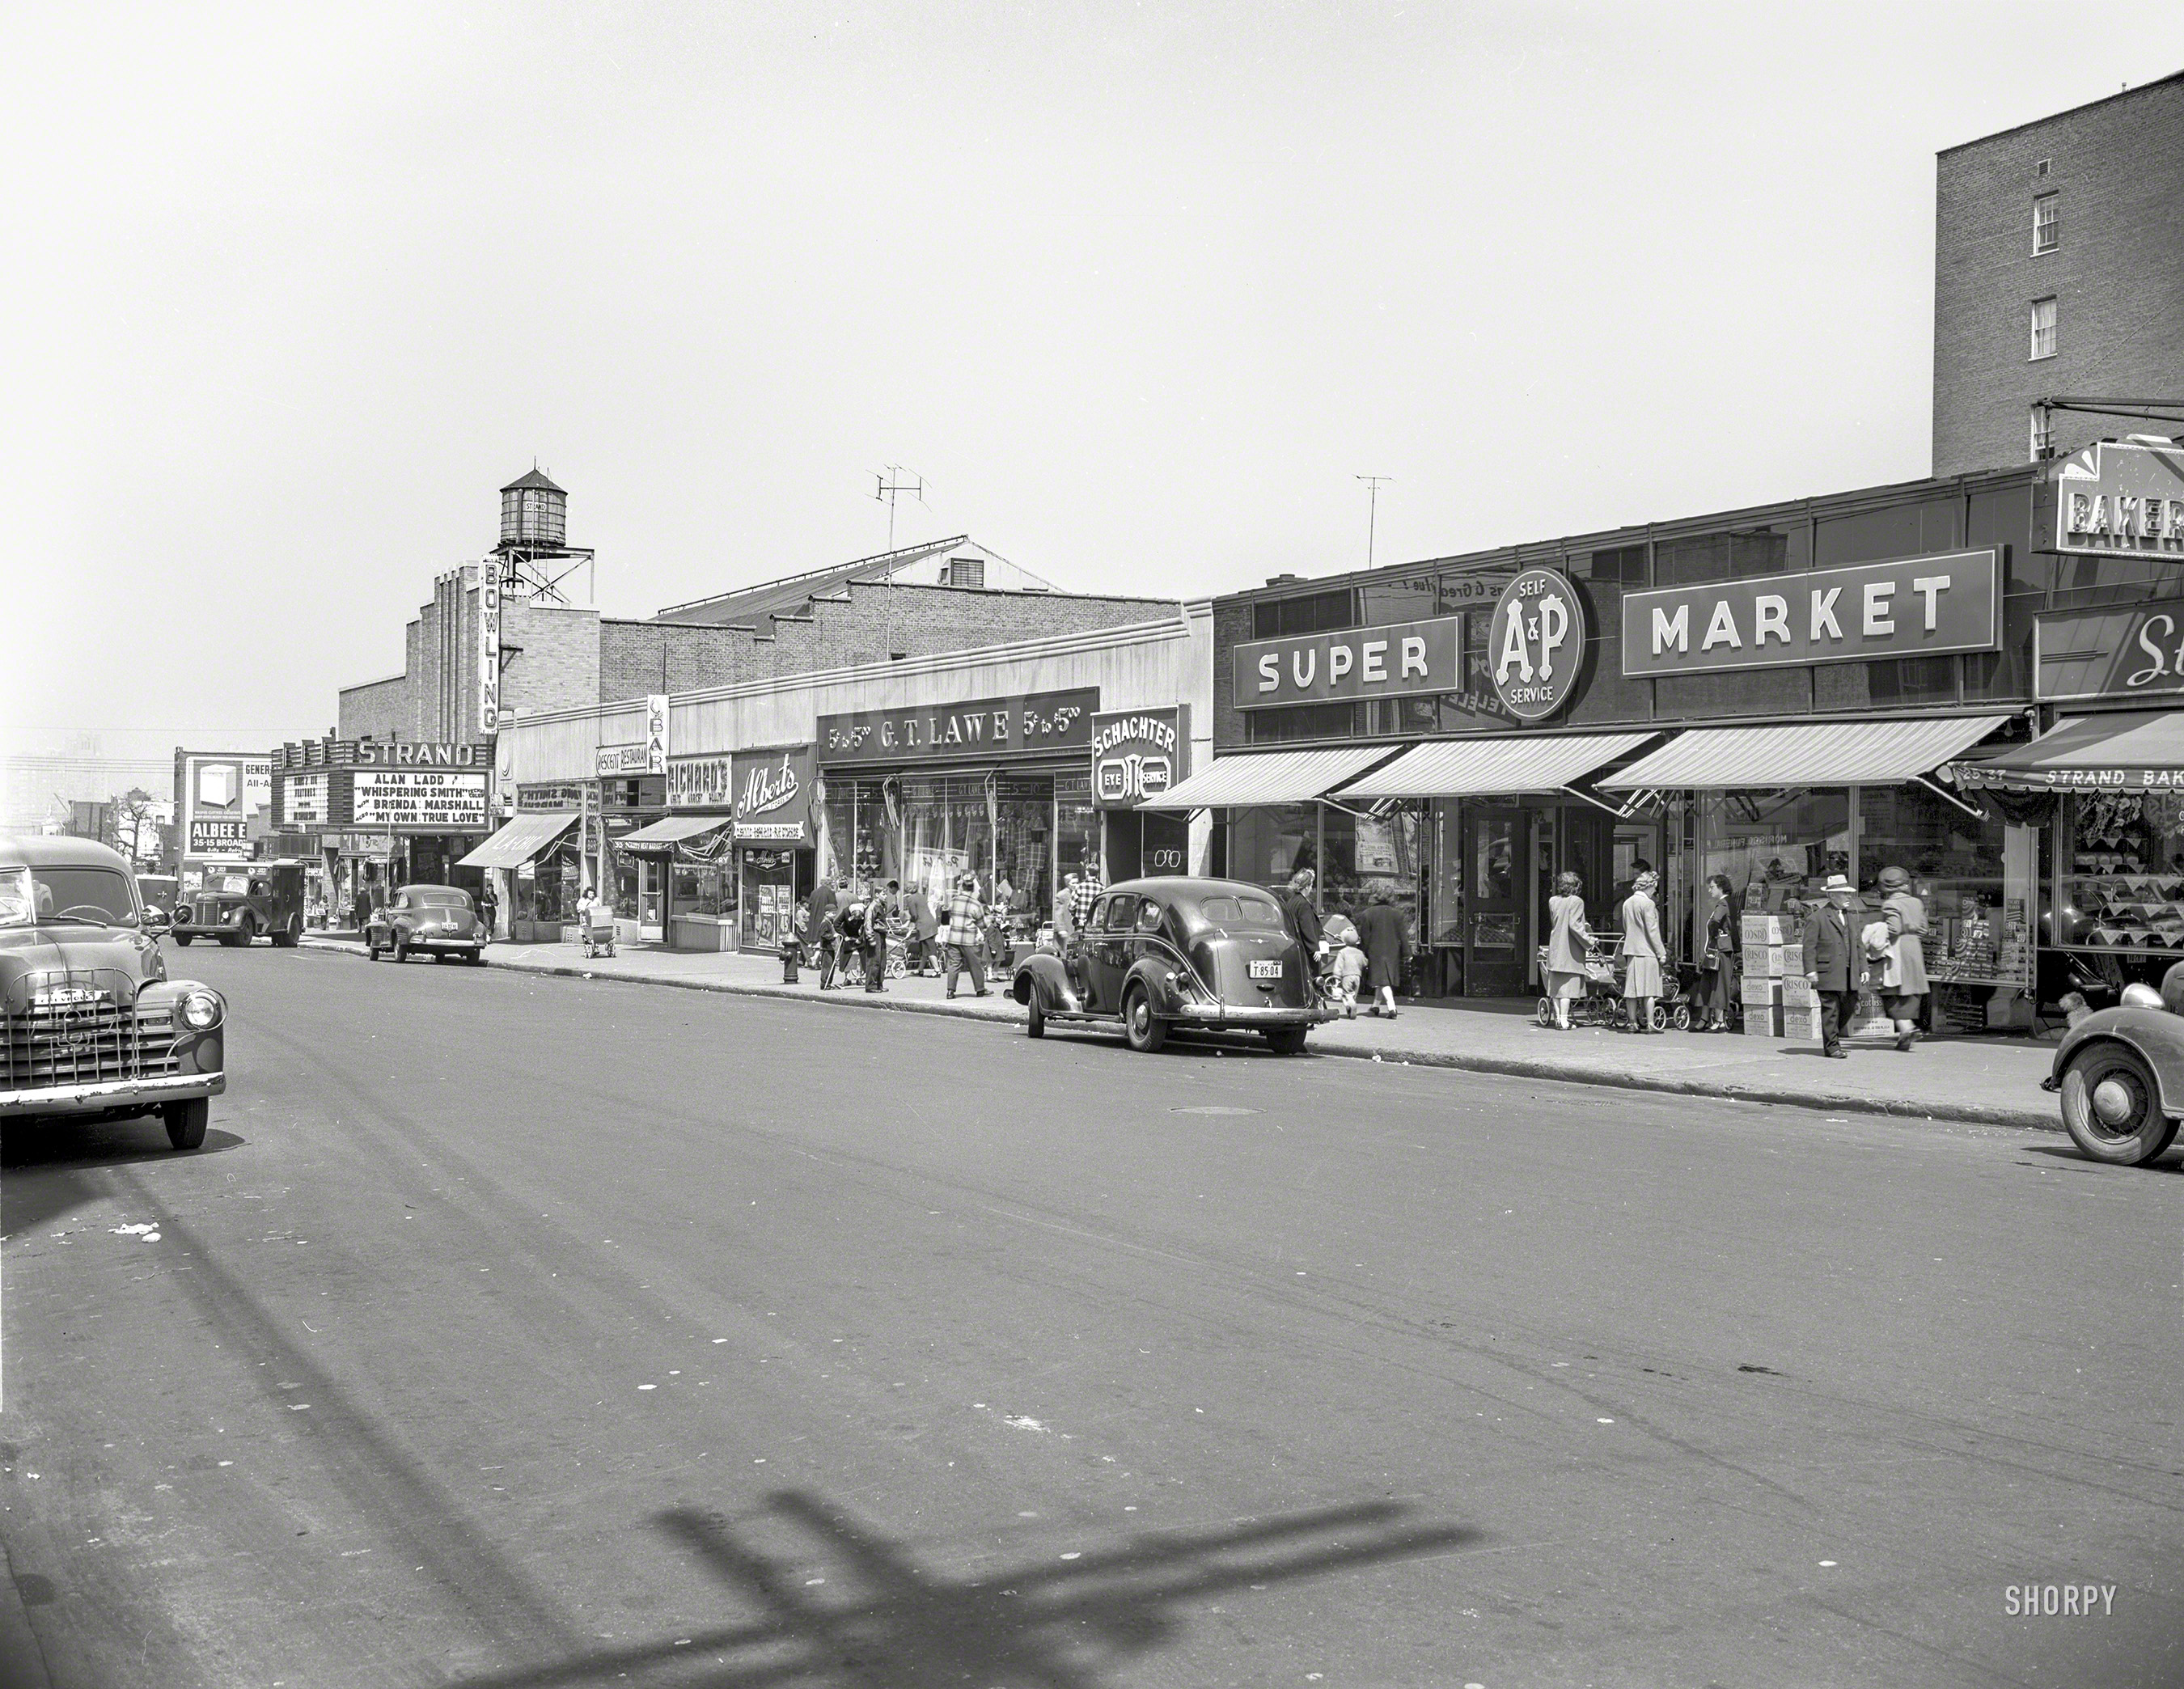 New York, 1949. "A&P Supermarket on Broadway in Queens." Now playing at the Strand: Alan Ladd in Whispering Smith. Photo by John M. Fox. View full size.